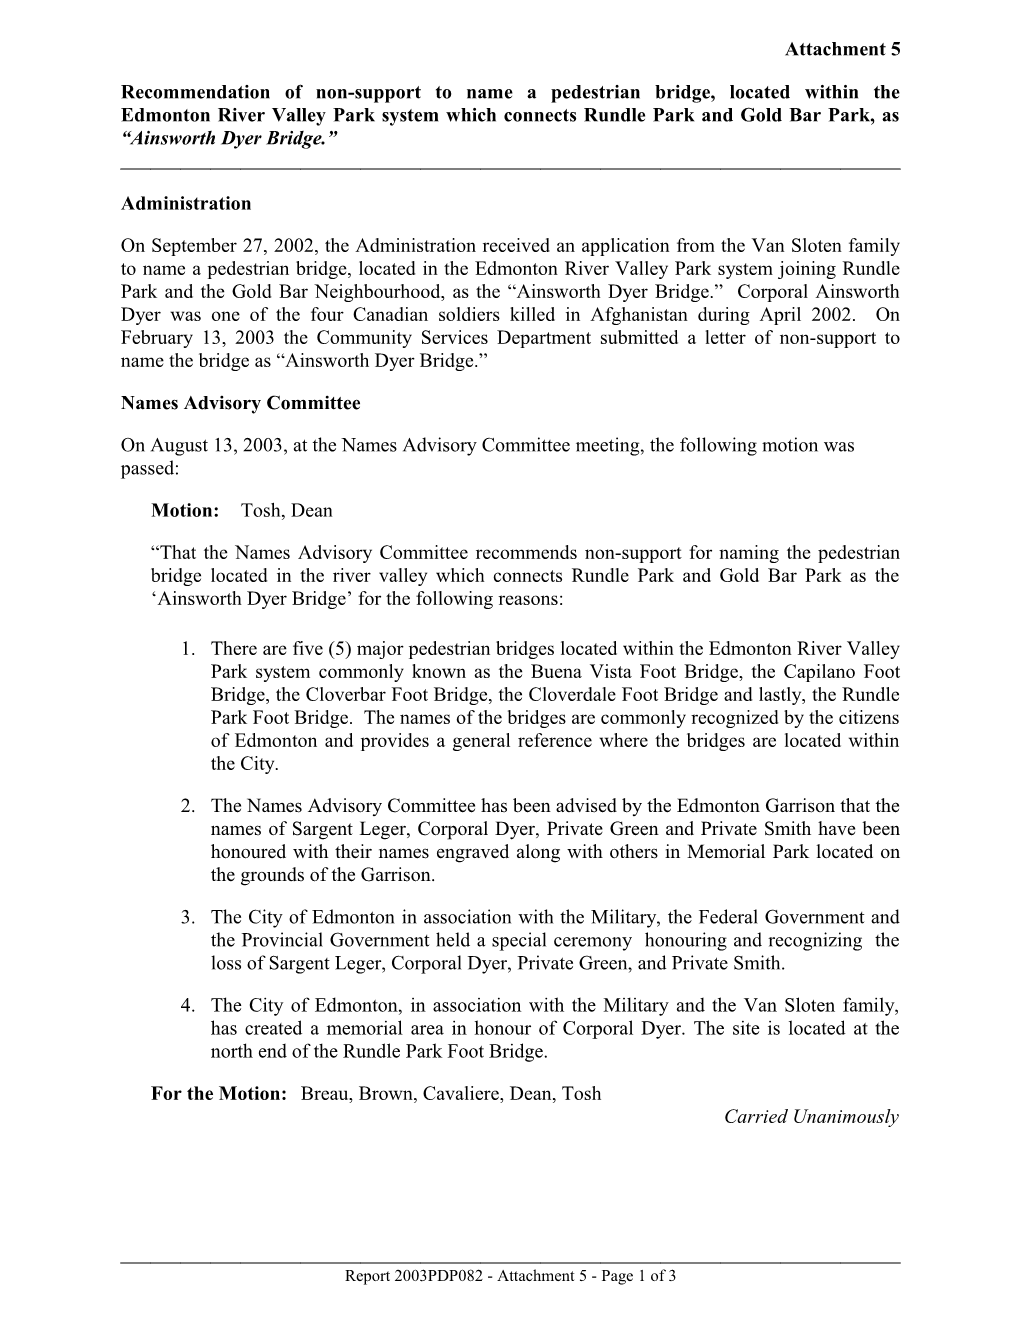 Report for Executive Committee September 17, 2003 Meeting